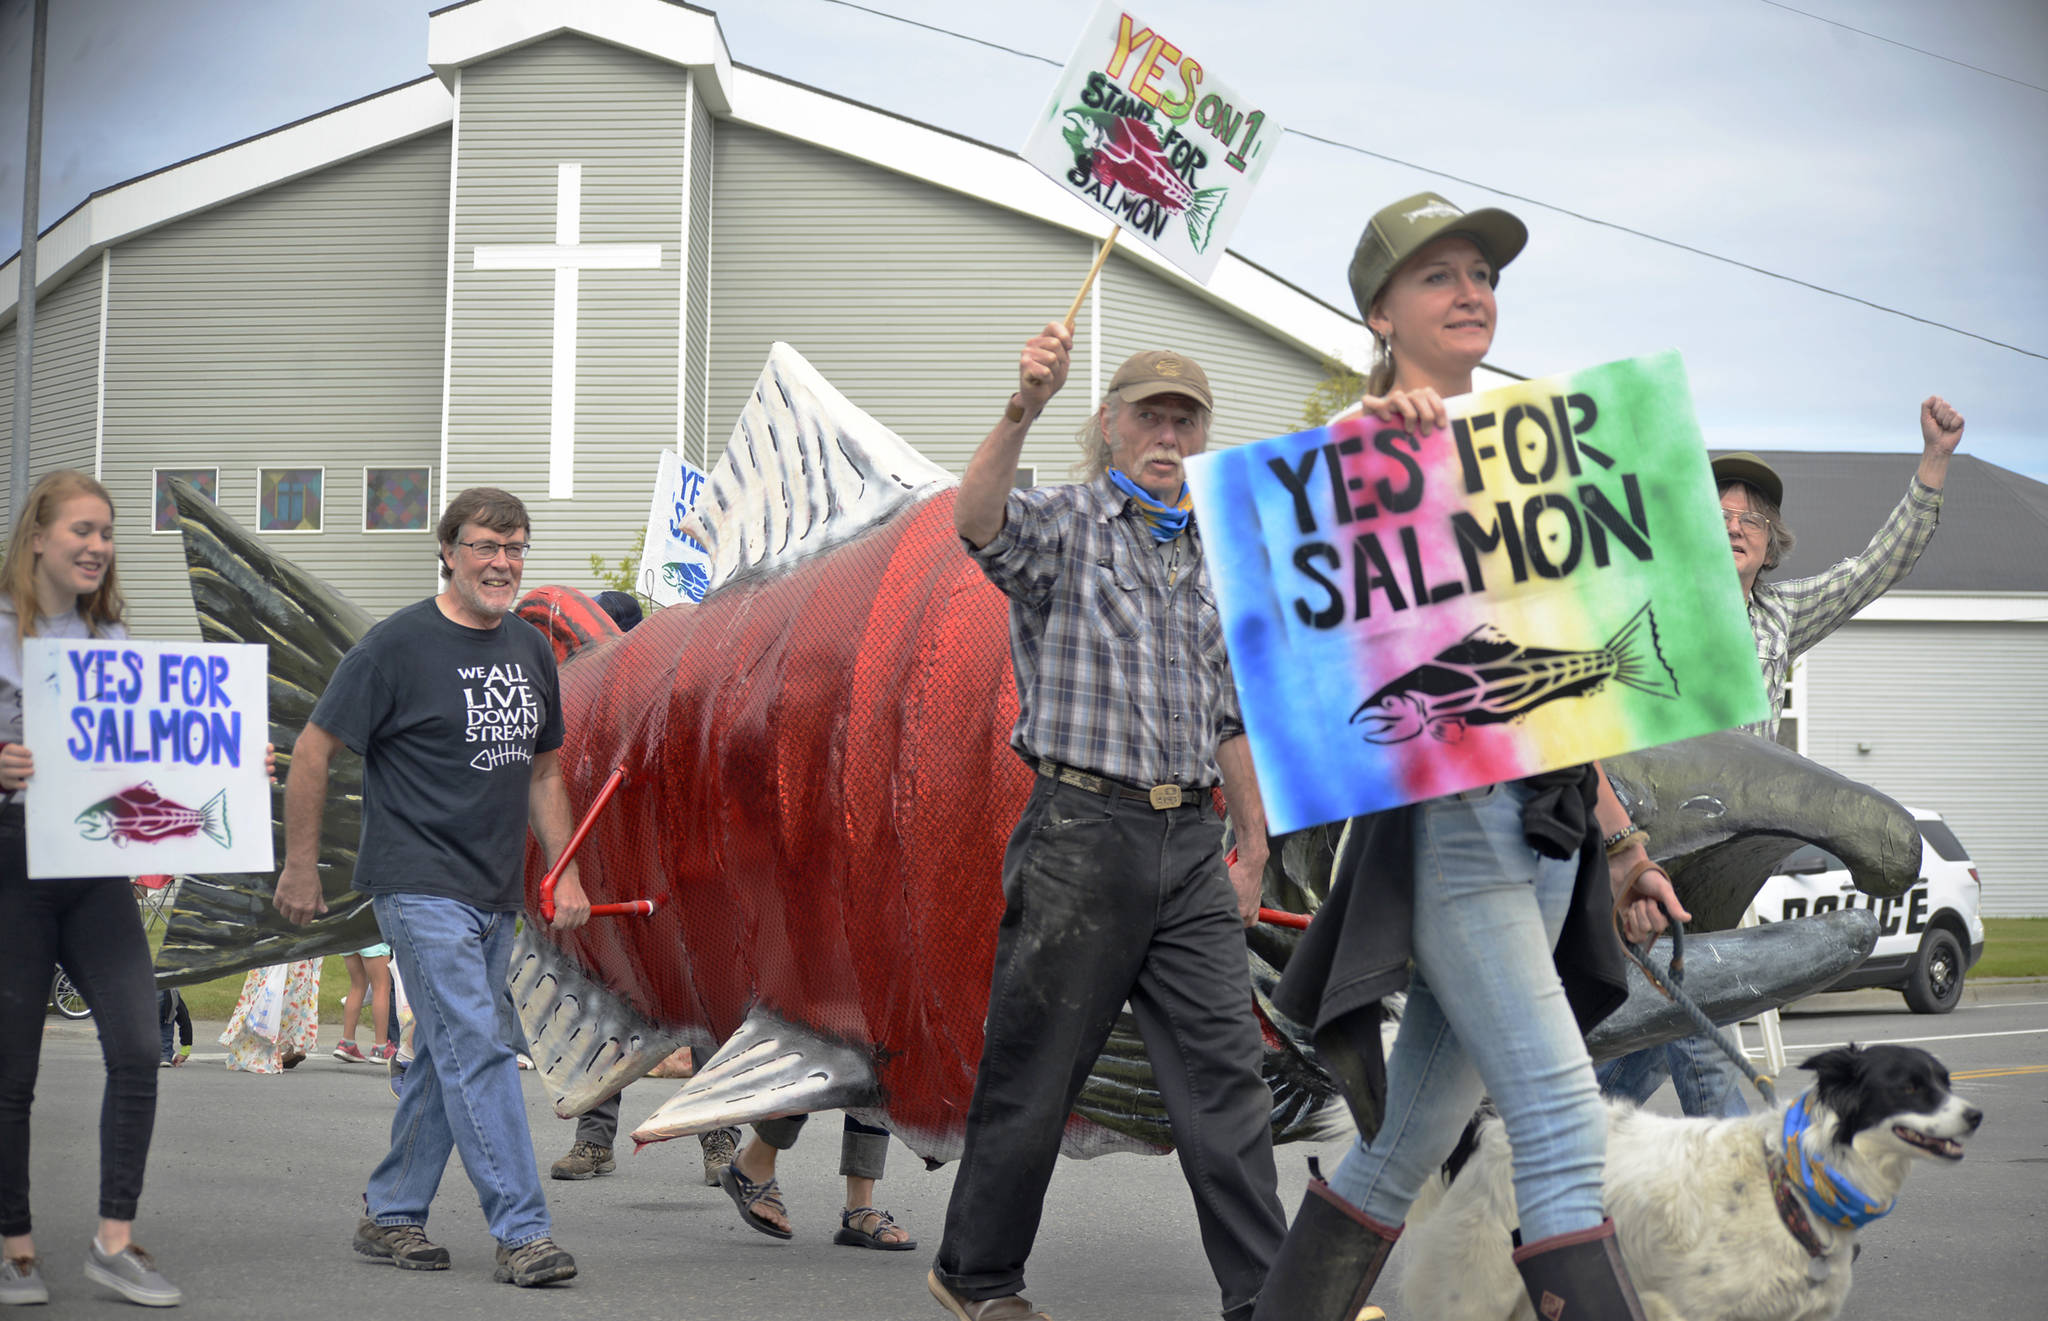 Volunteers in Stand for Salmon’s float in the Progress Days parade carry a large replica of a sockeye salmon down Marydale Avenue on Saturday, July 28, 2018 in Soldotna, Alaska. The parade kicks off the weekend-long event celebrating Soldotna’s history, with a market on Saturday and Sunday in Soldotna Creek Park and a concert Saturday night followed by a free community barbecue Sunday. (Photo by Elizabeth Earl/Peninsula Clarion)